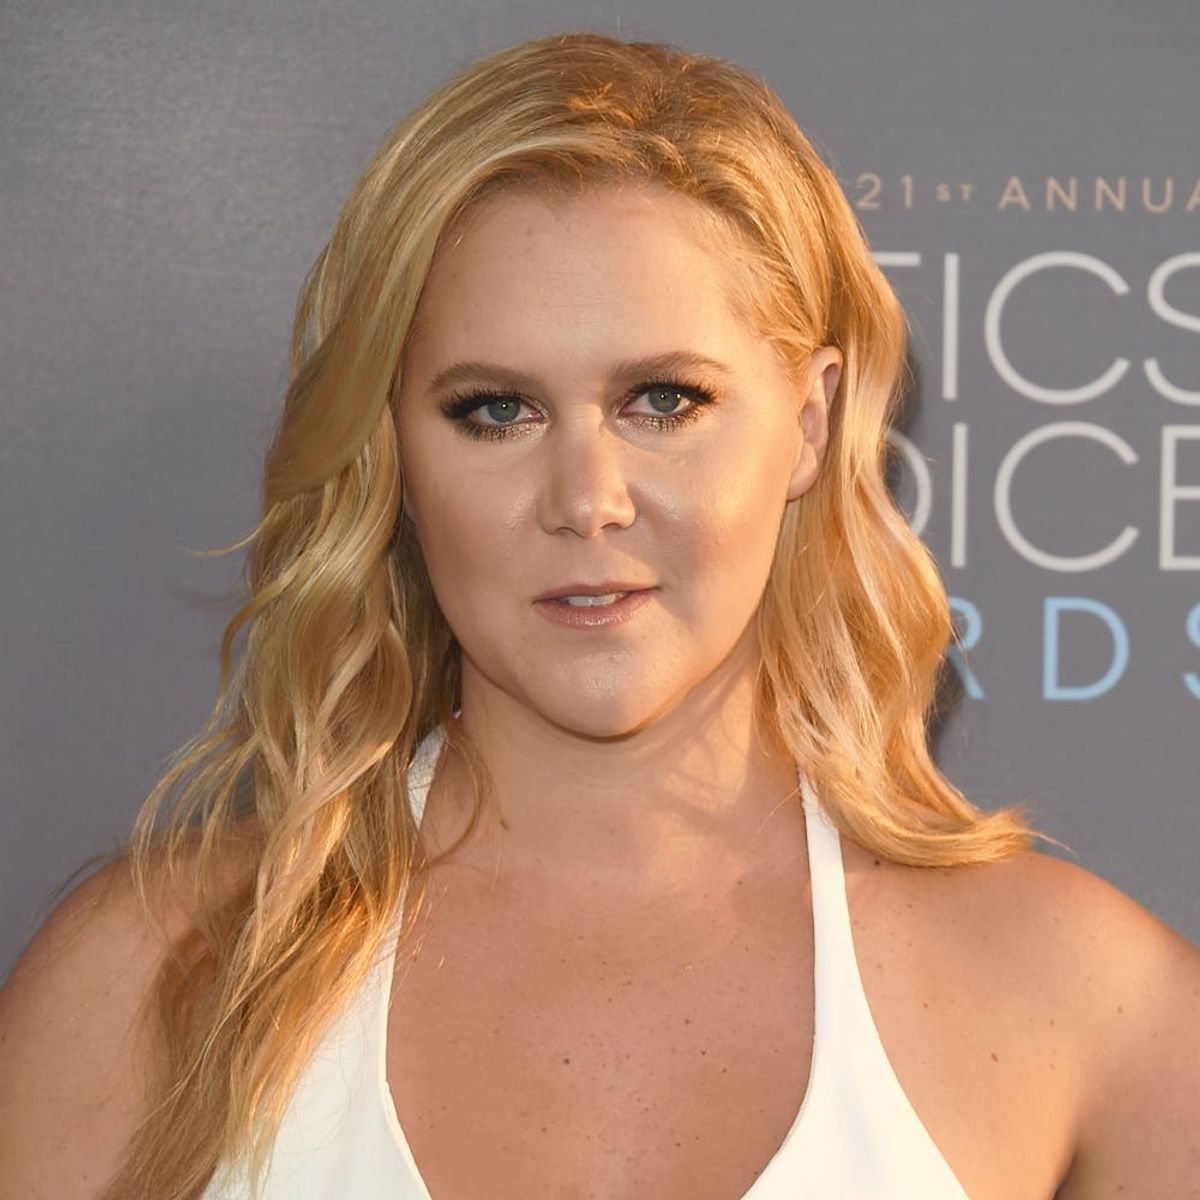 This Is Why Amy Schumer Might Not Take Photos With Fans Anymore